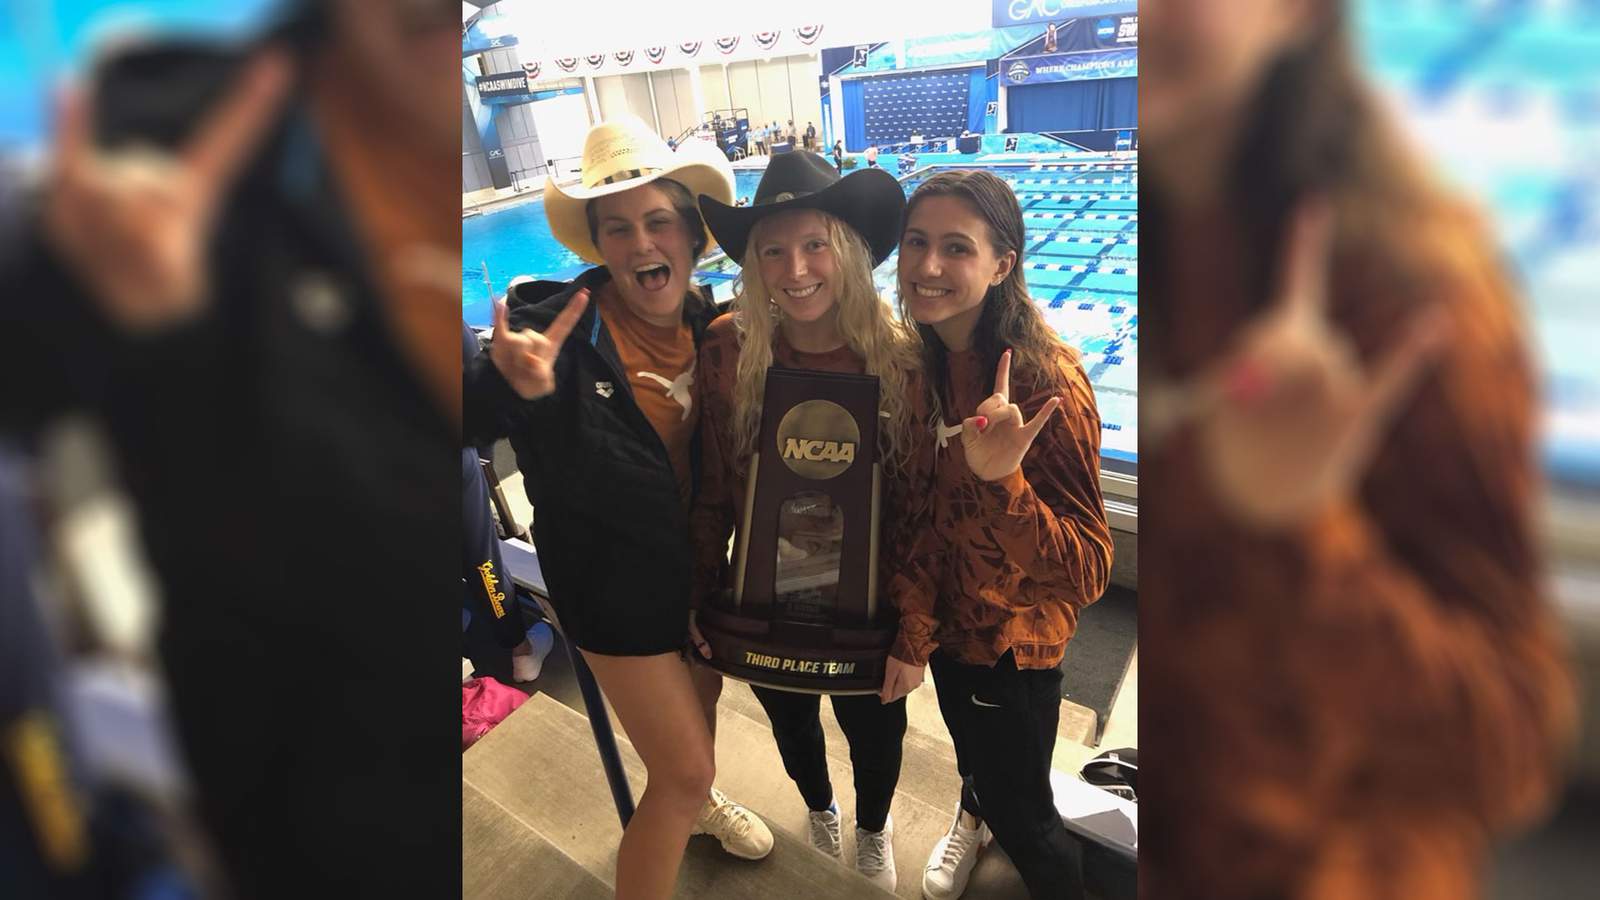 Daleville’s Olivia Bray helps lead Texas to 3rd place finish in NCAA Swim & Dive Championship